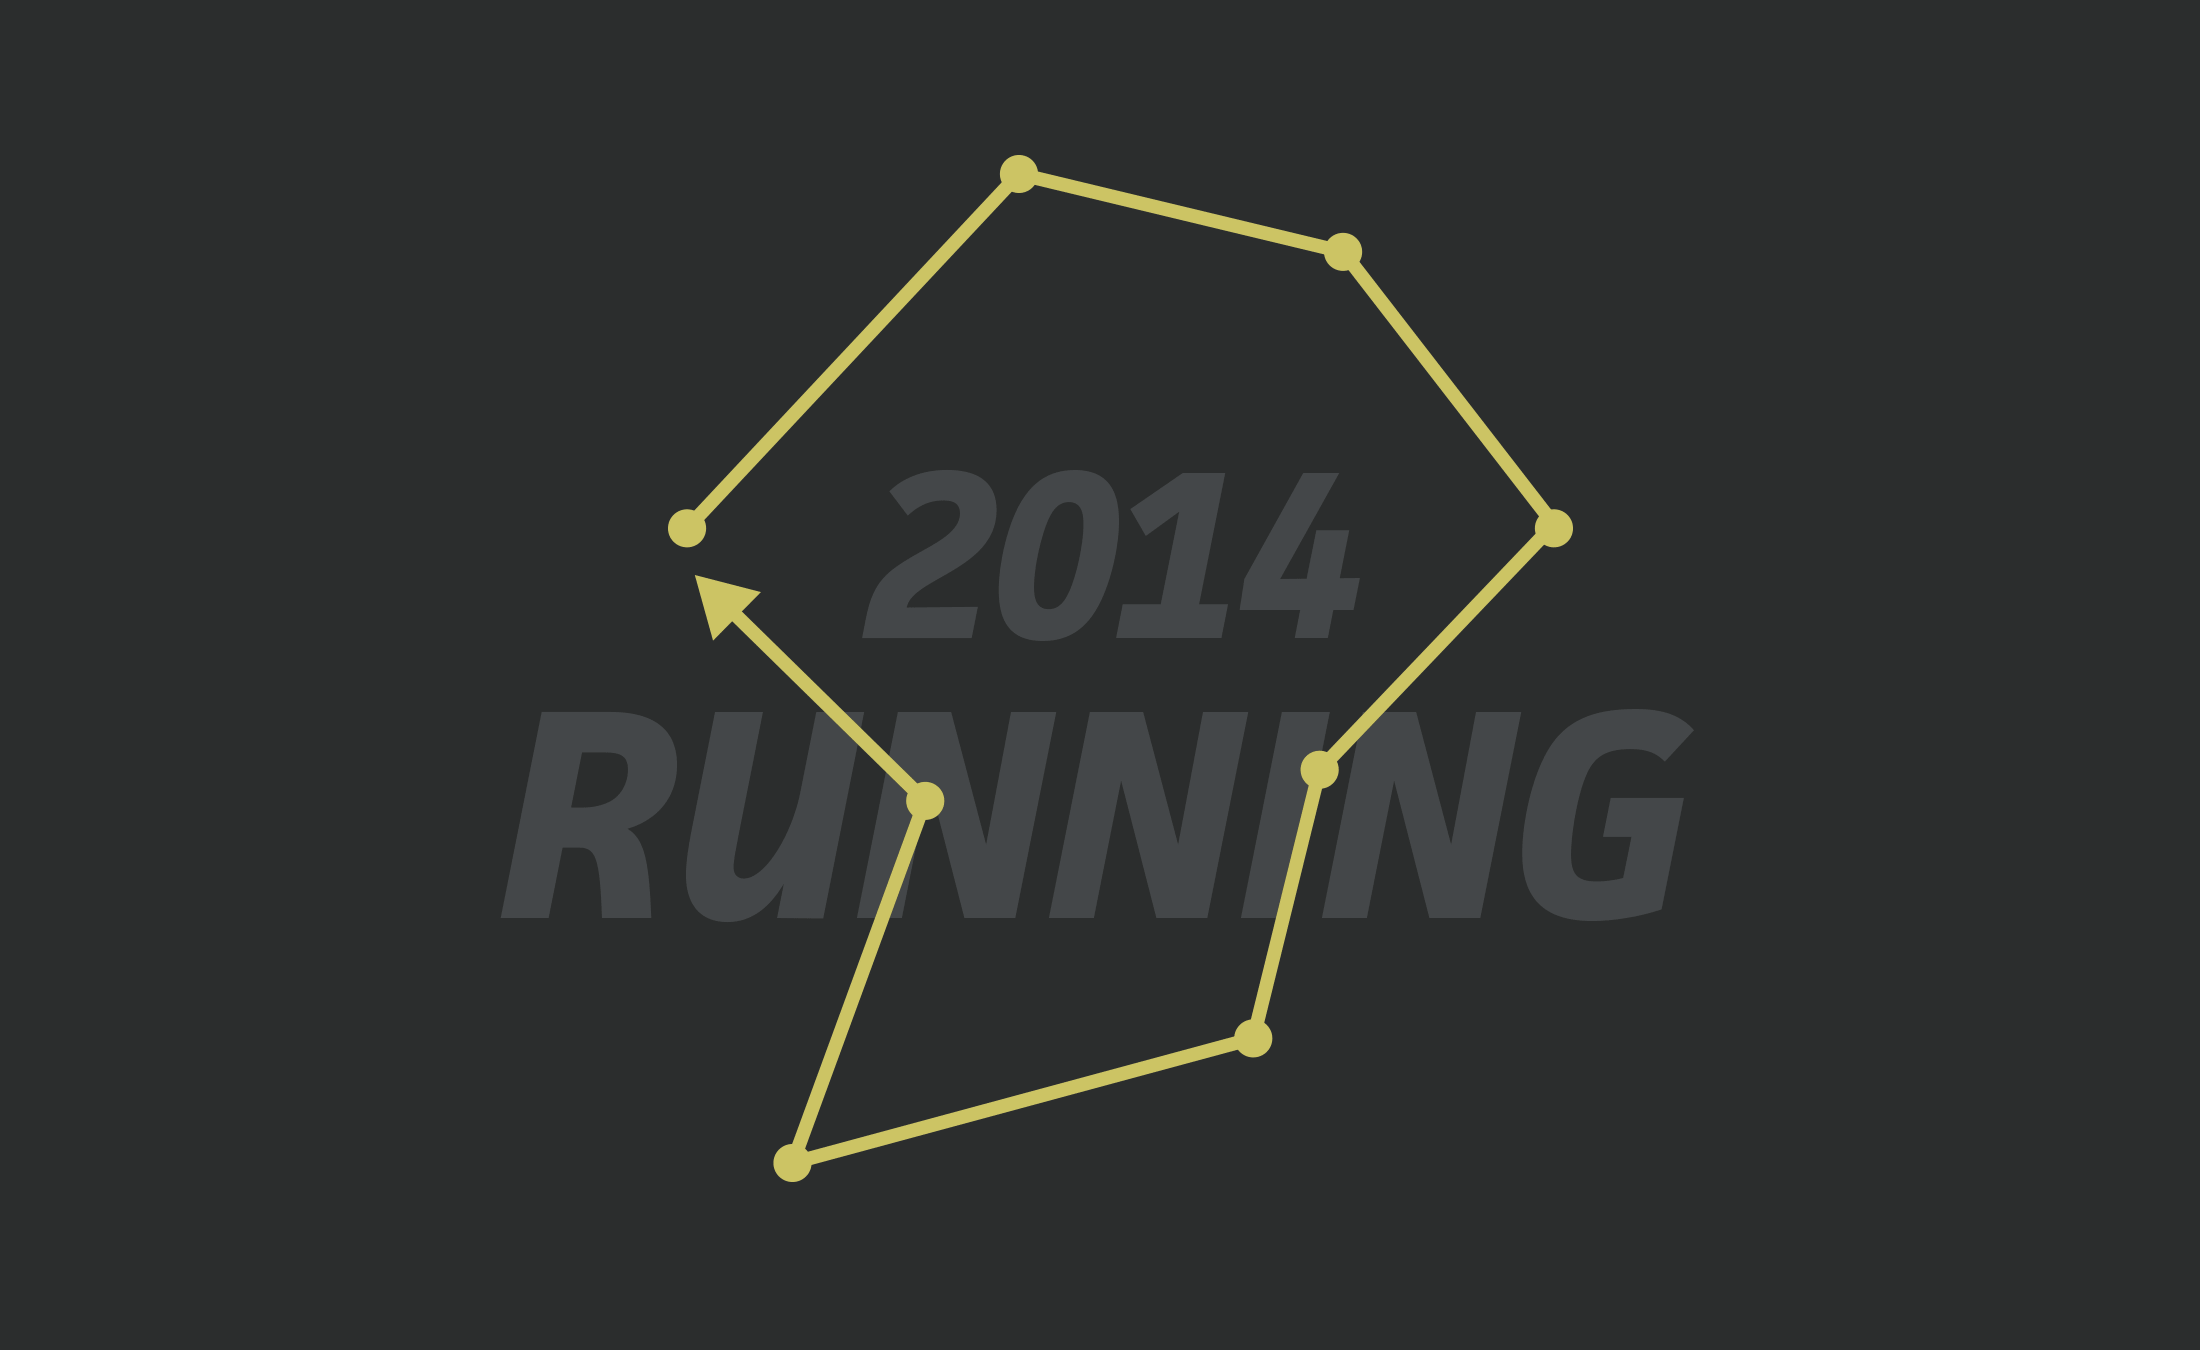 The logo for my 2014 Running website project representing exploratory running routes.